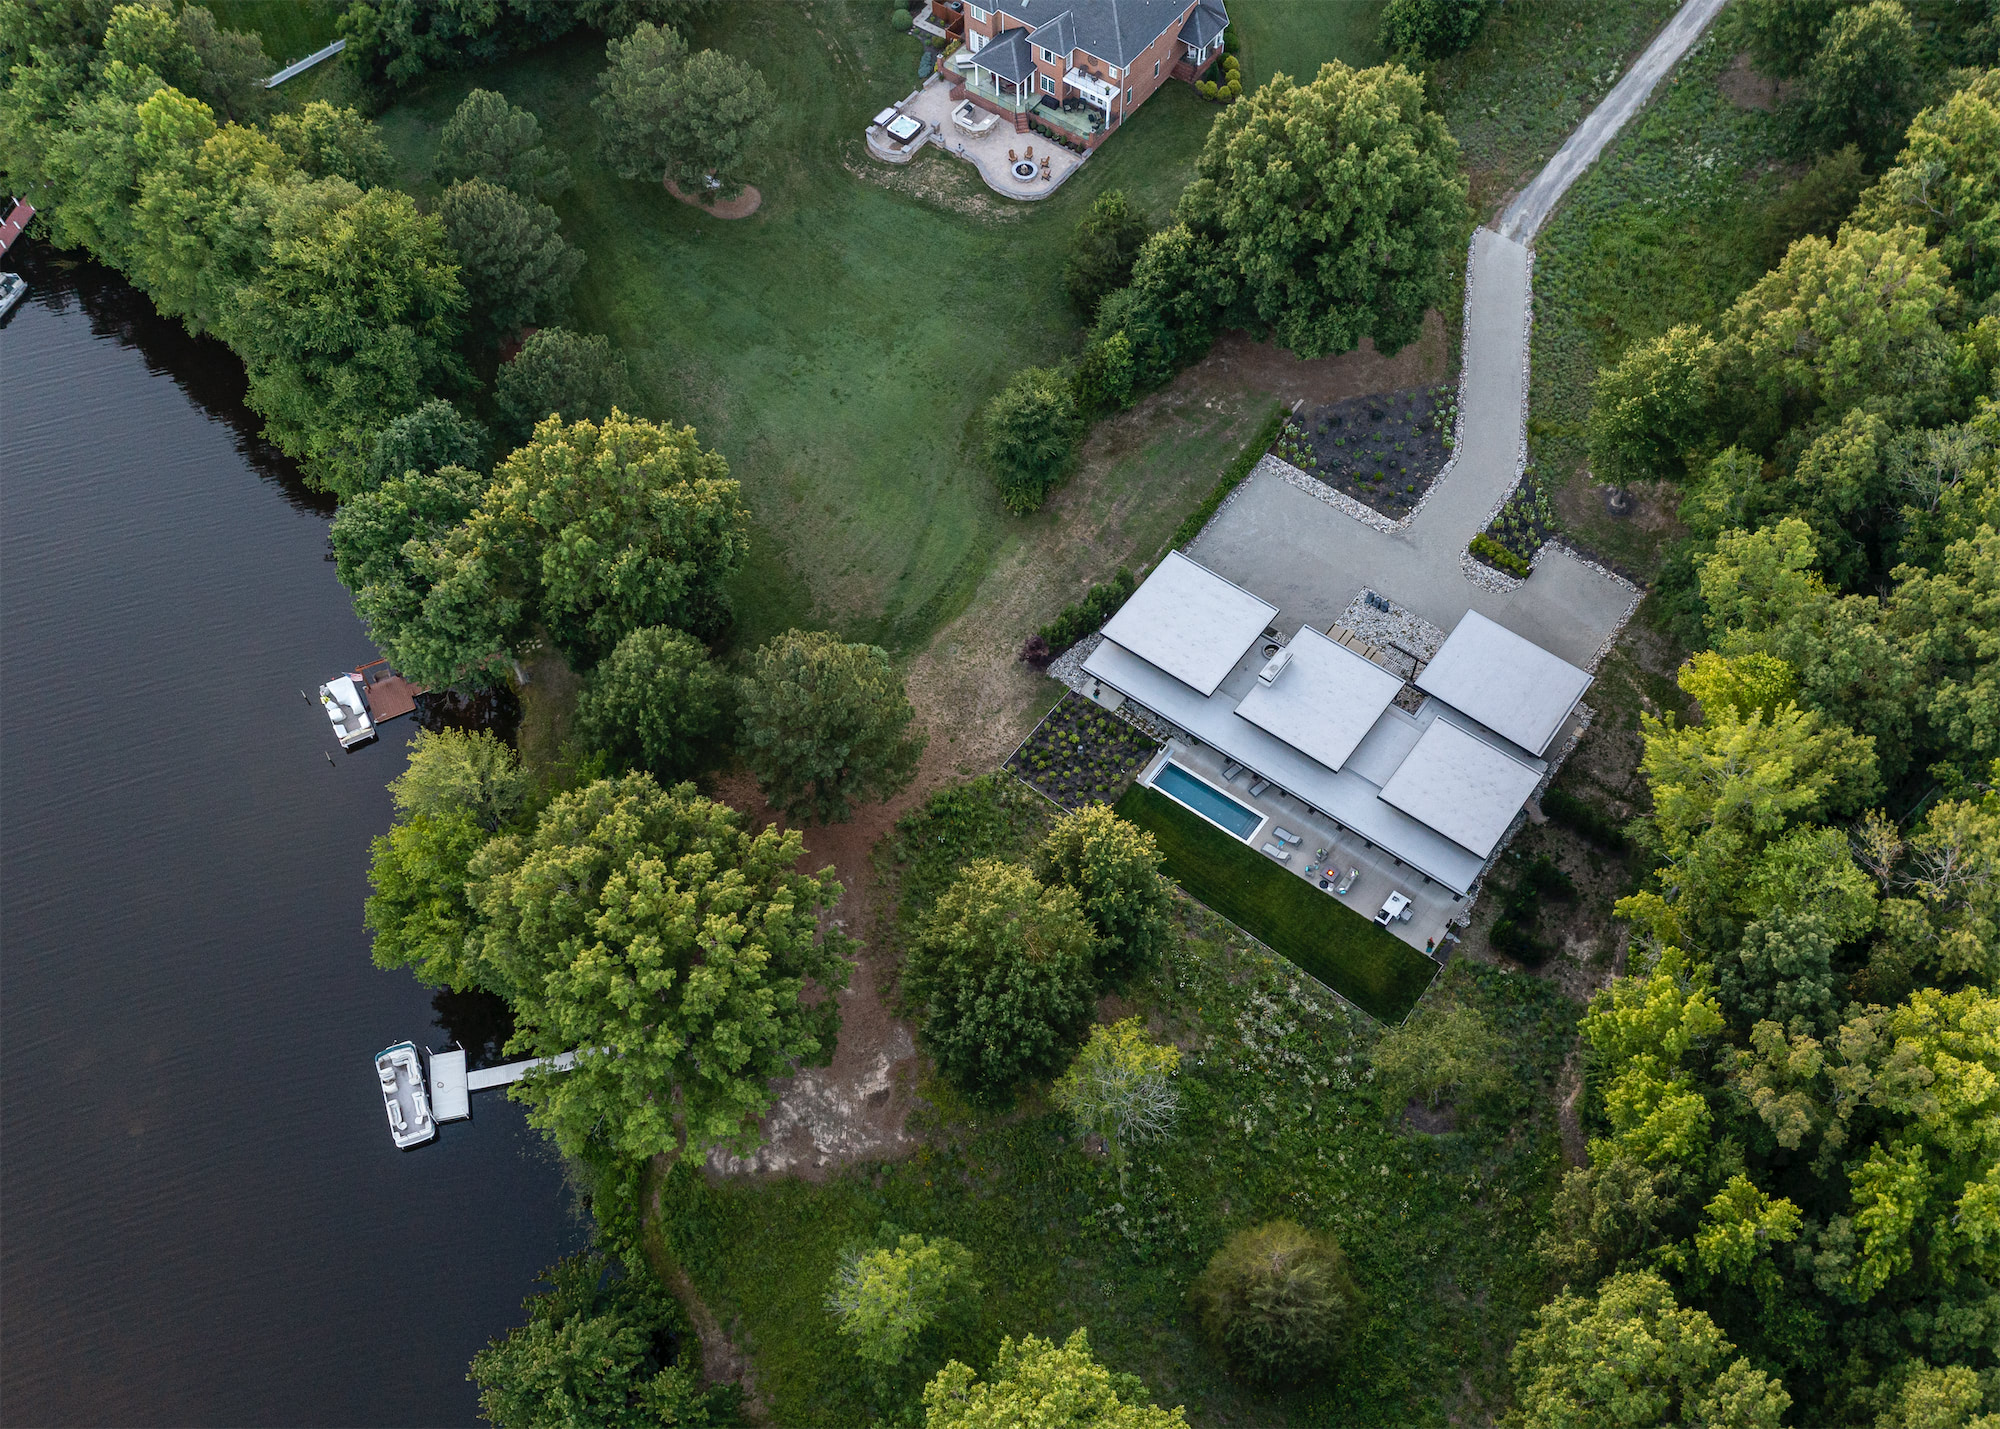 Drone shot of the house from overhead